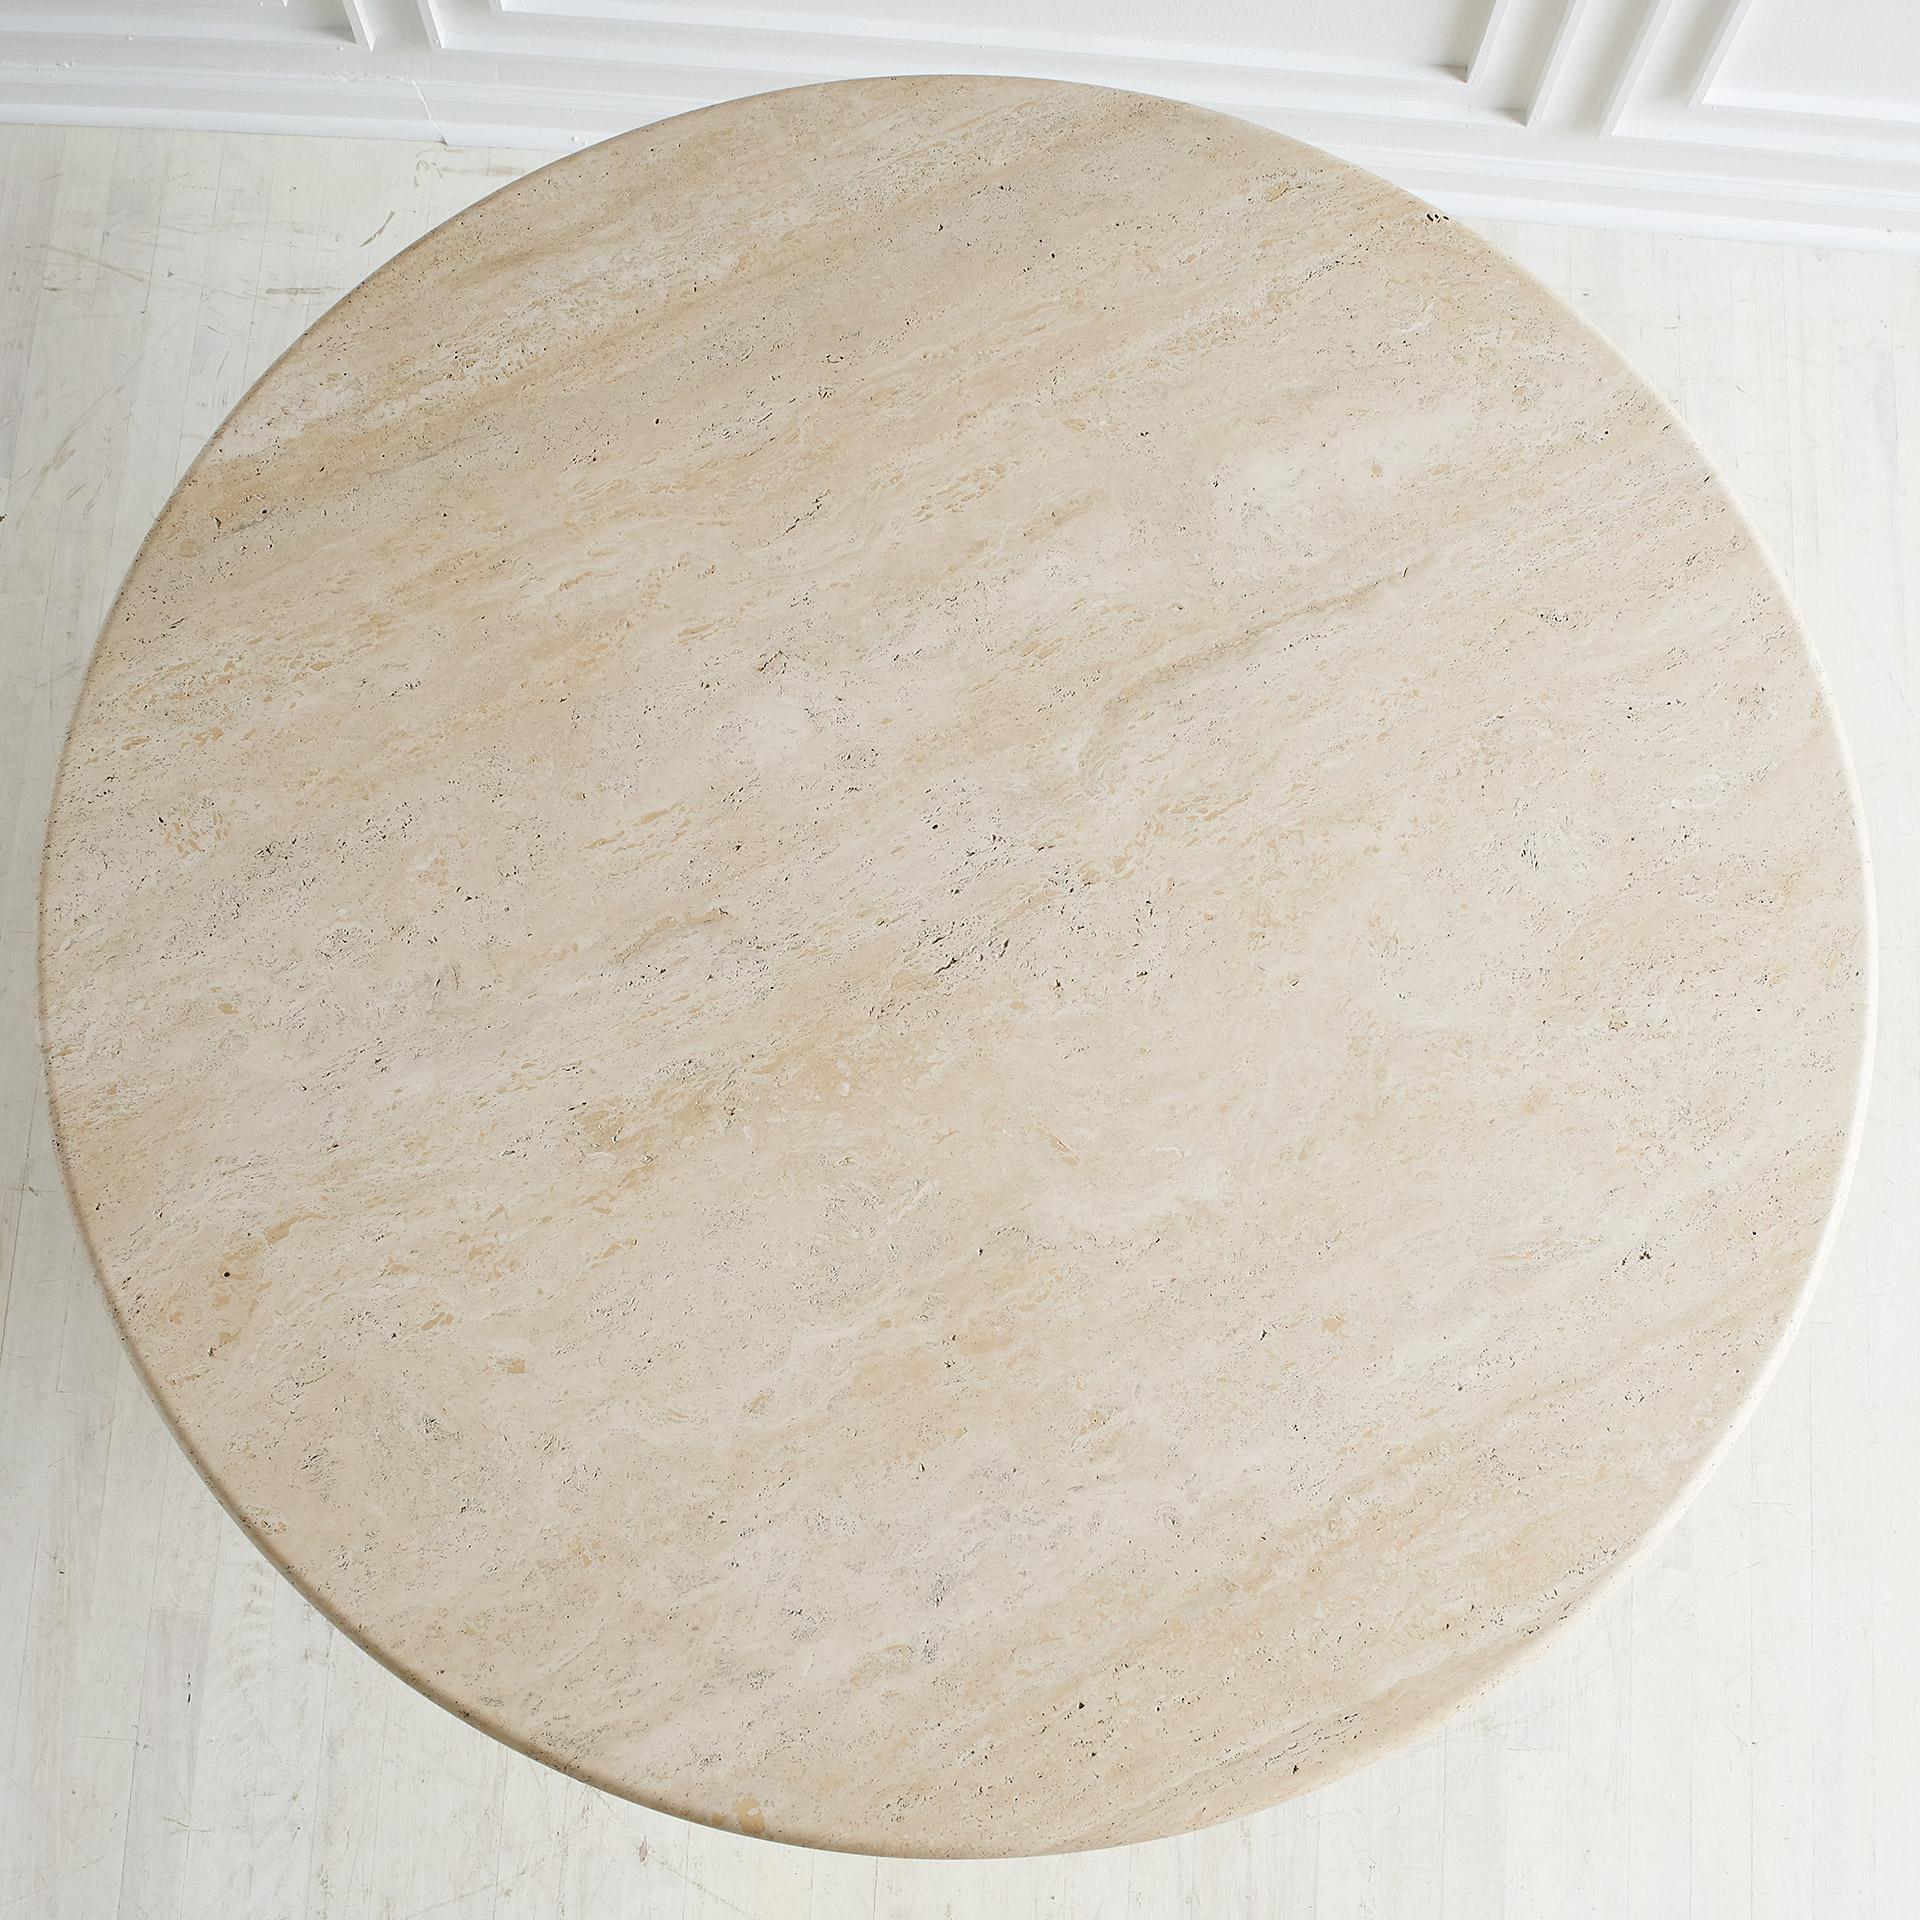 A remarkable dining table designed by Marzio Cecchi for Studio Most in honed travertine. Thick circular travertine discs with brass rings in between supporting a thick travertine tabletop with a full bullnose edge. 

The tabletop is positioned on